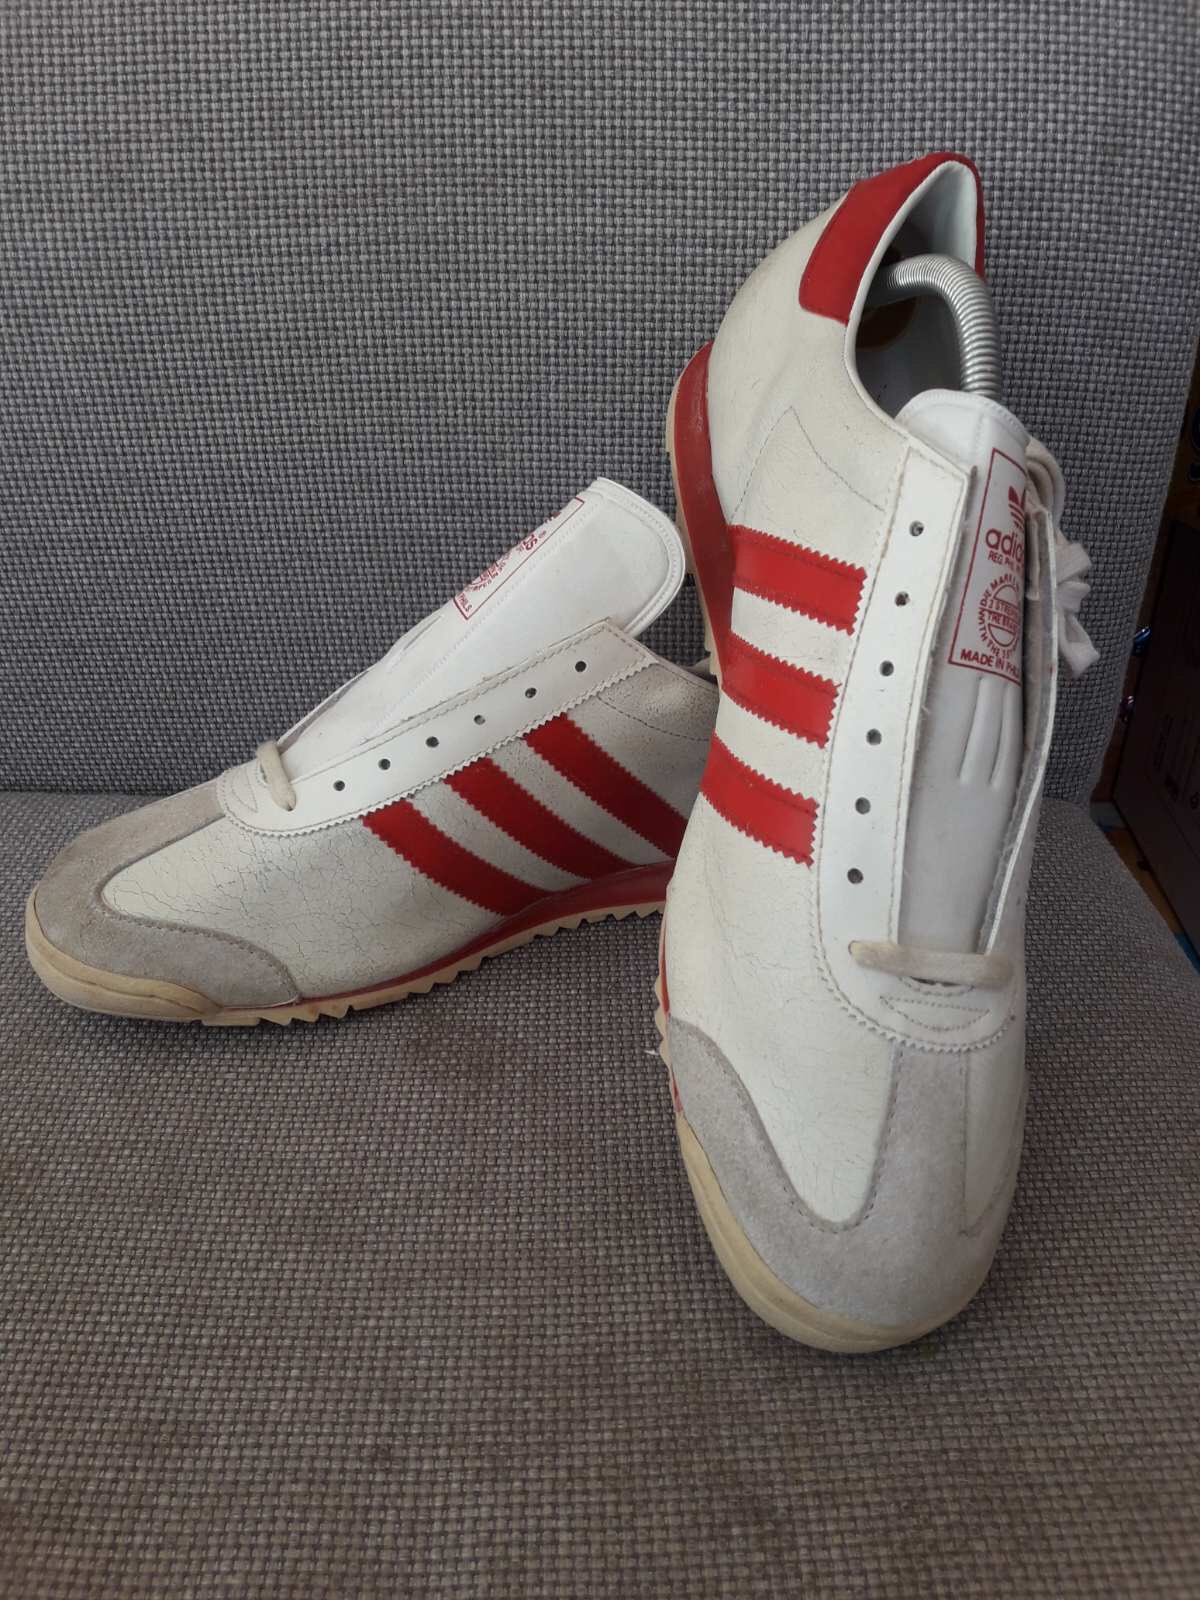 Paul Bryson on Twitter: "Adidas Vienna UK10 Made in Philippines 1996 Brand new ... unworn Cracking to the but fully wearable ... mink oil will help soften the leather and